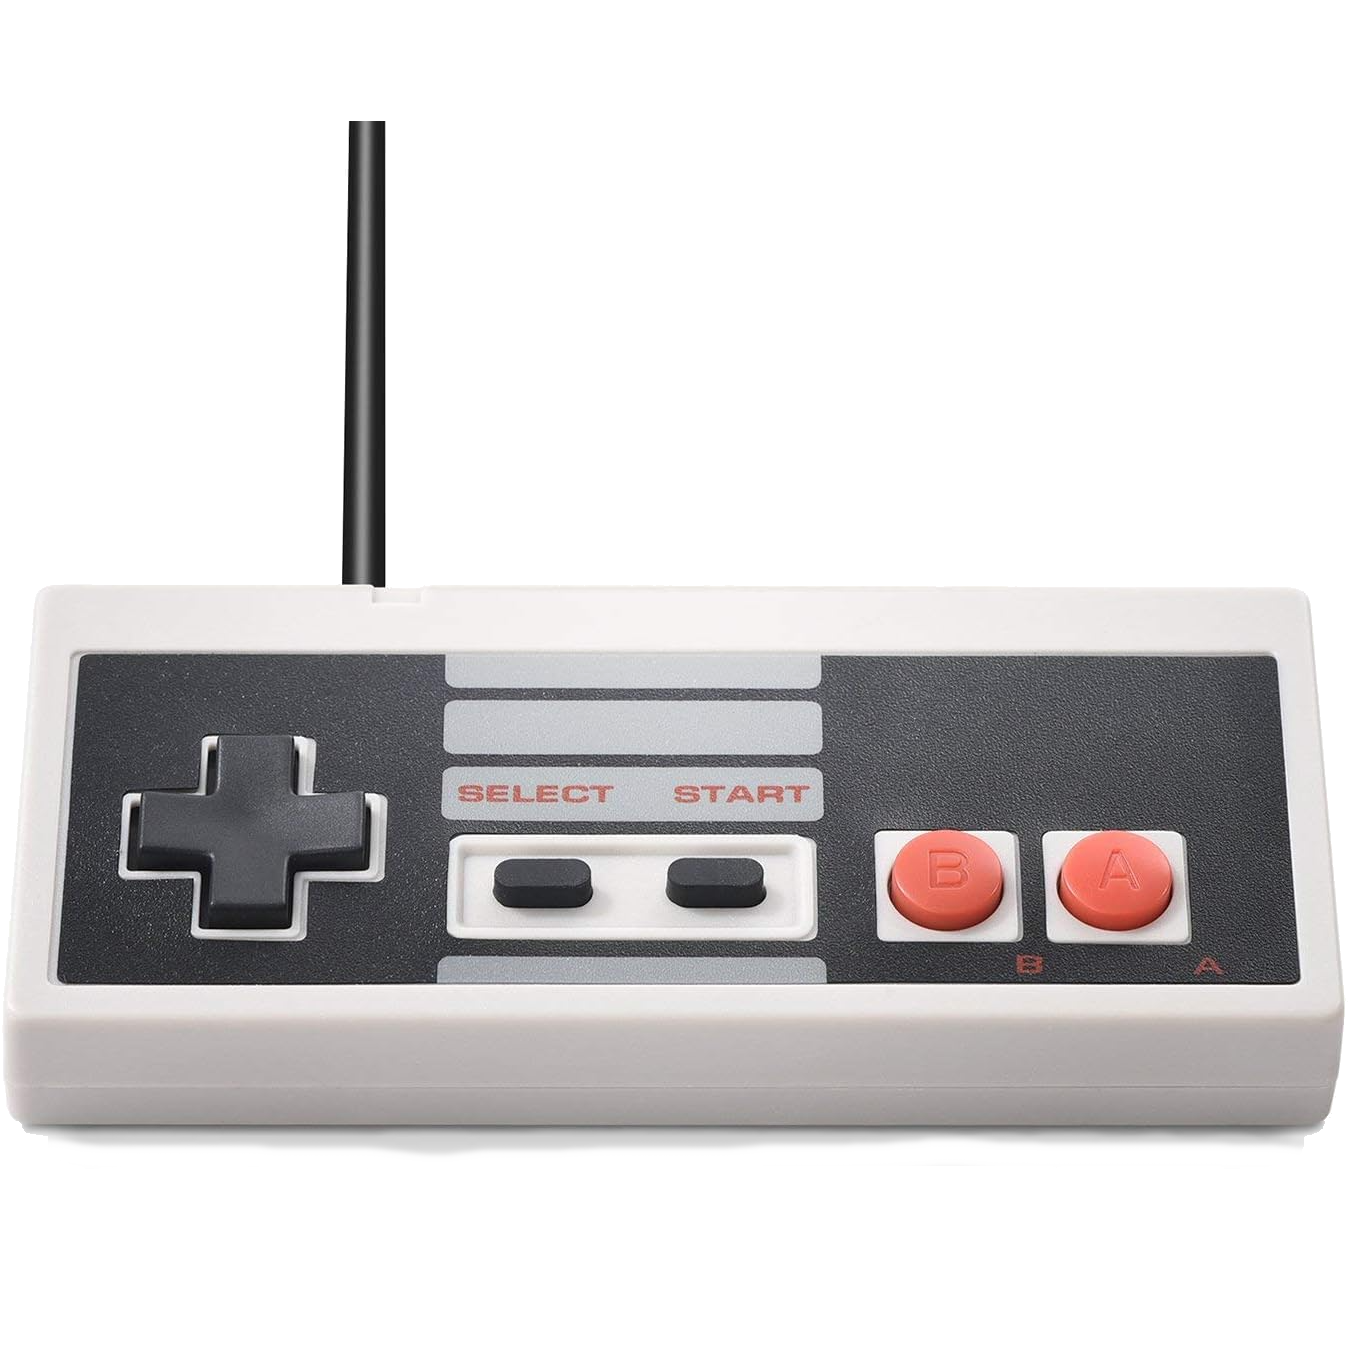 Suily NES controller